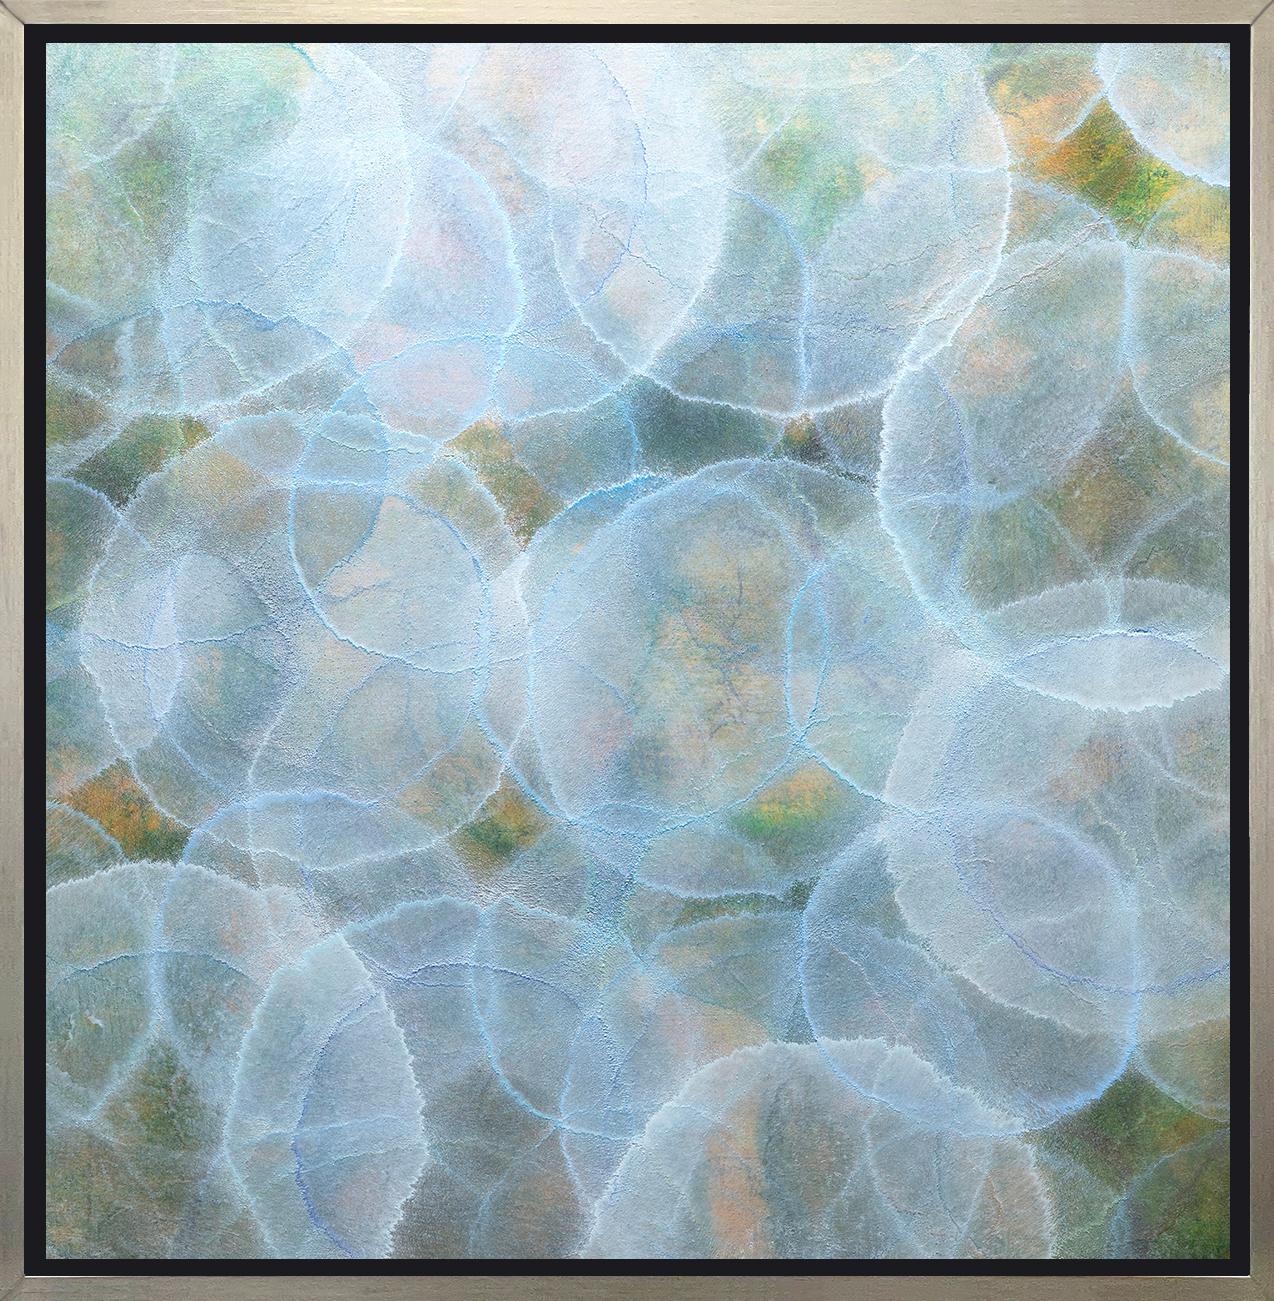 Roger Mudre Abstract Print - "Staphisagria, " Framed Limited Edition Giclee Print, 30" x 30"